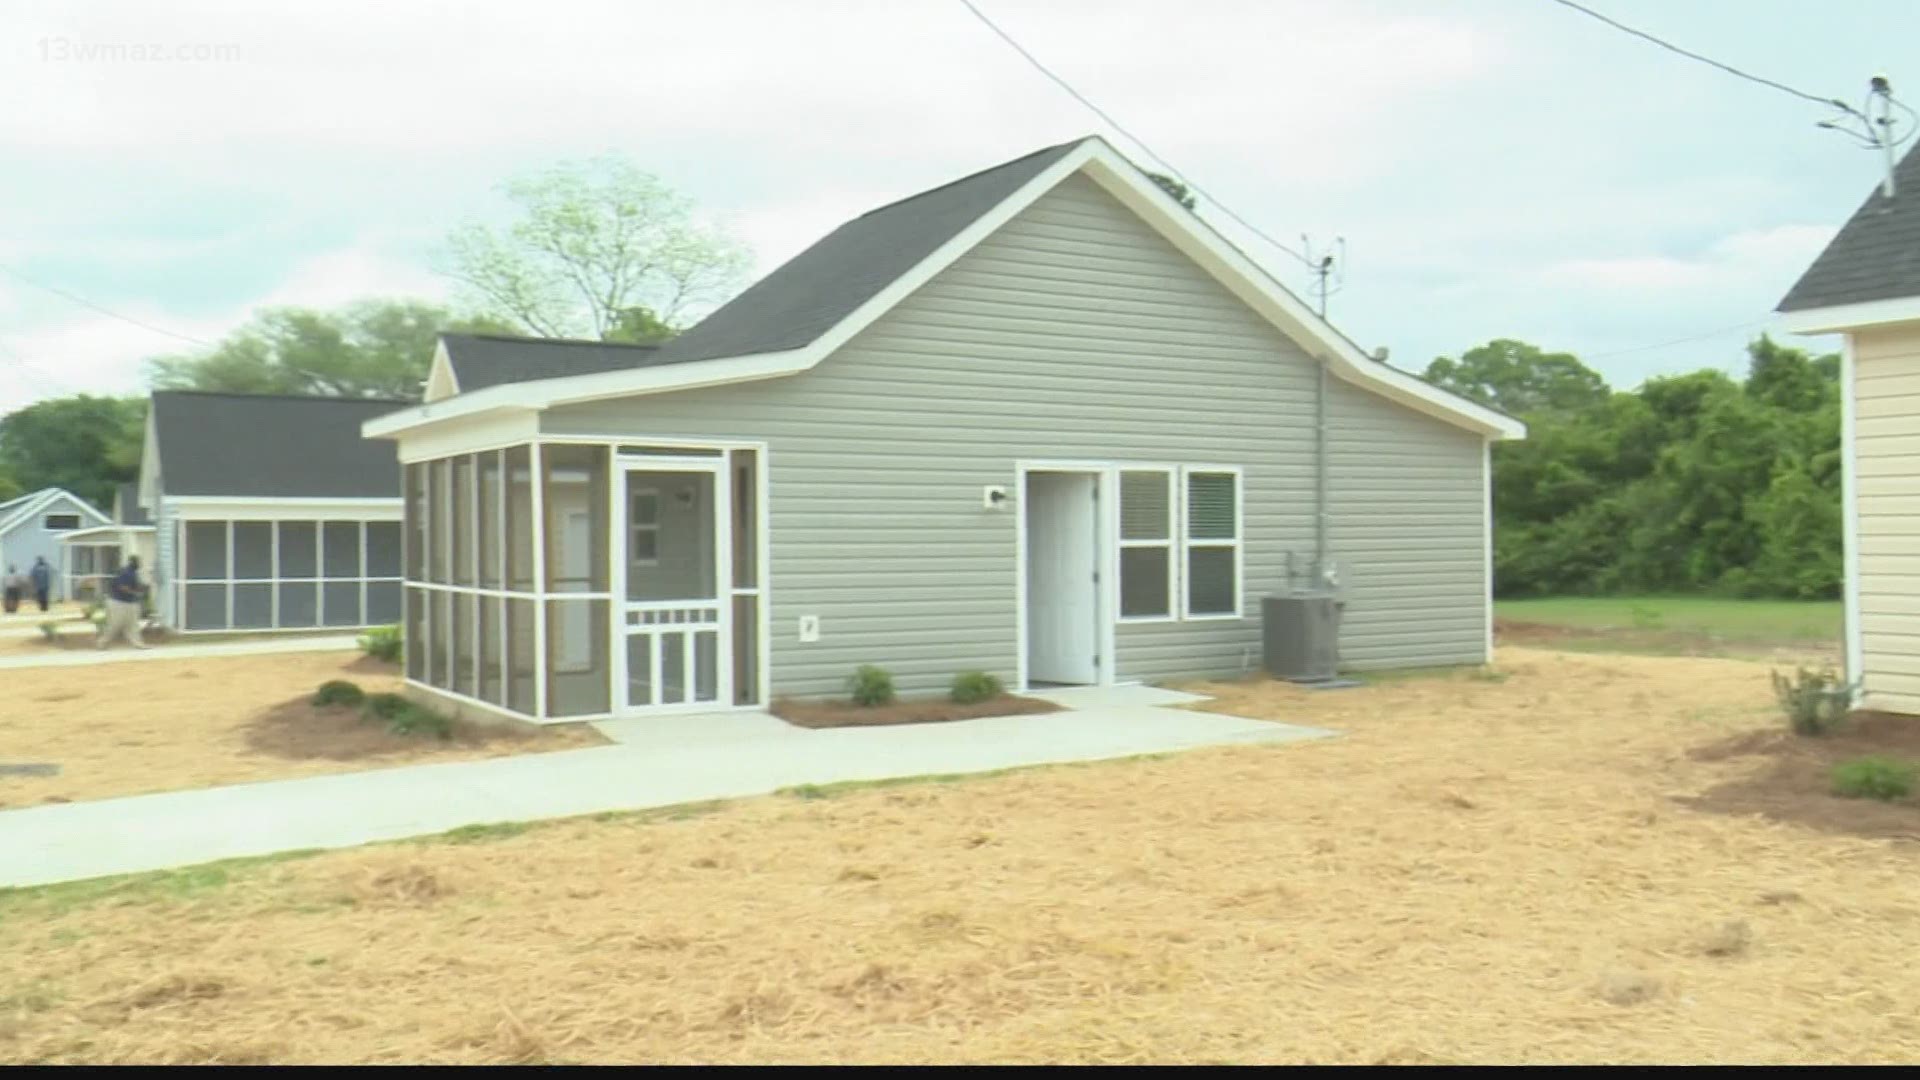 After sewer and drainage problems caused delays, Warner Robins now has new tiny homes for seniors and veterans.